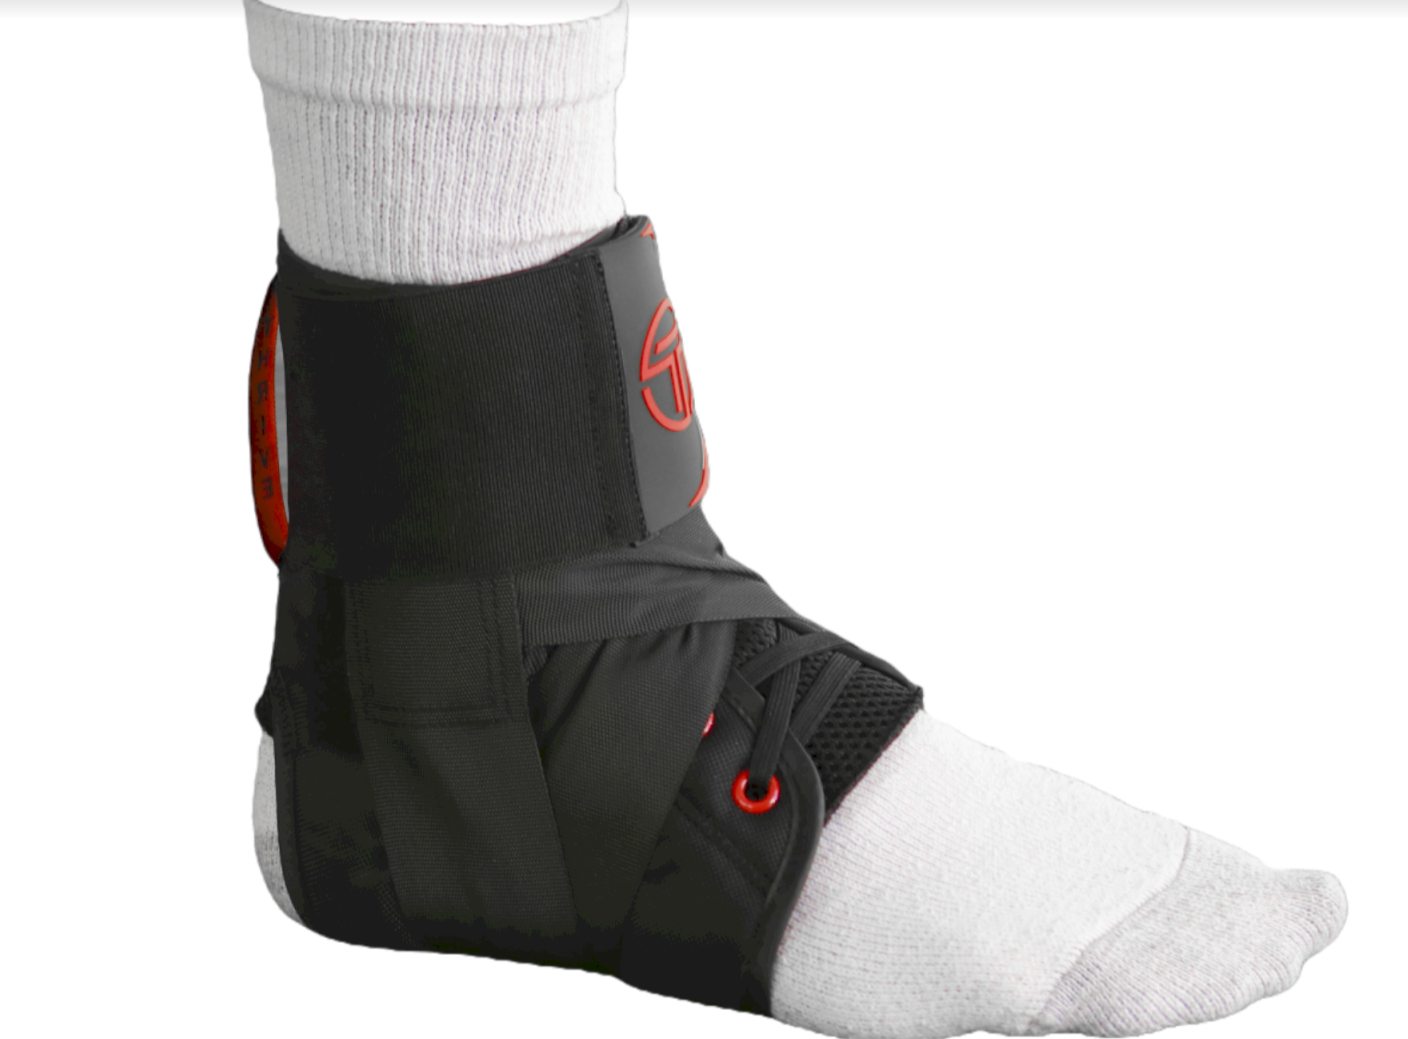 ASO Lace Up Ankle Brace - Stabilizing Ankle Support - Simply Medical